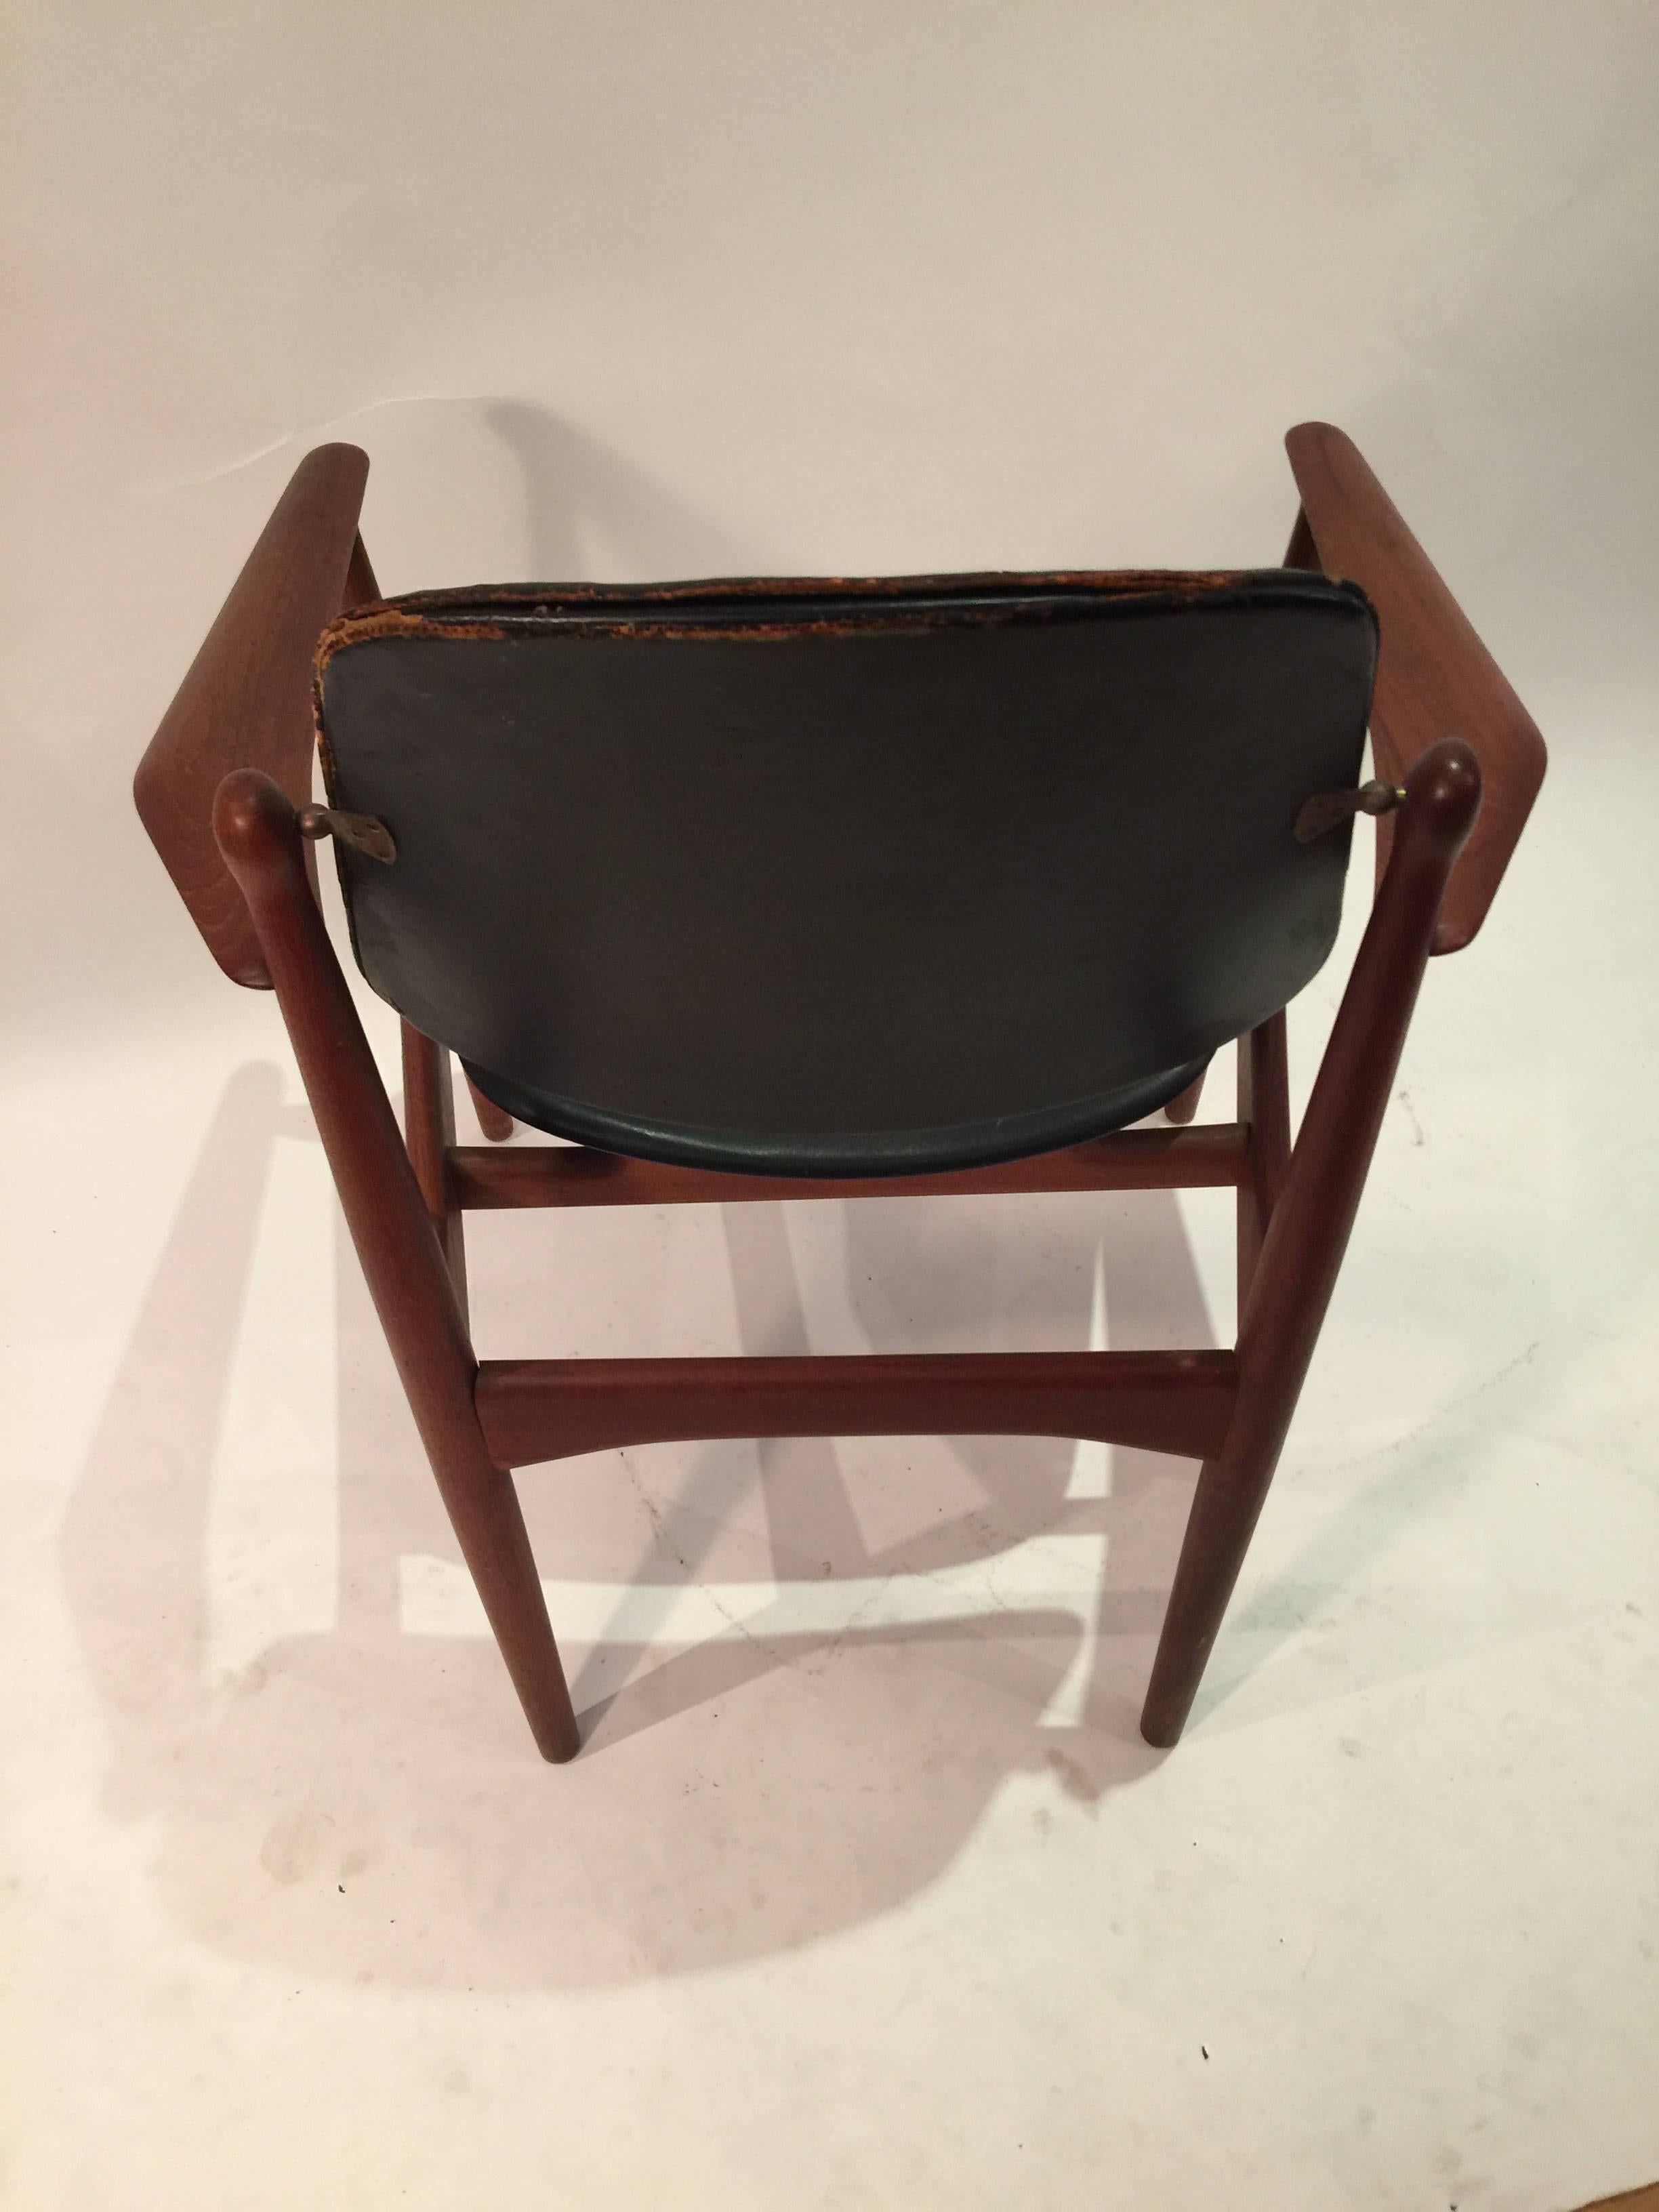 Arne Vodder design armchair model FD-184 made by France & Daverksen. Seat and back covered in original black leather. The swivel back hardware is made of brass. Leather is heavily distressed and missing some stitches to the back and loss to the